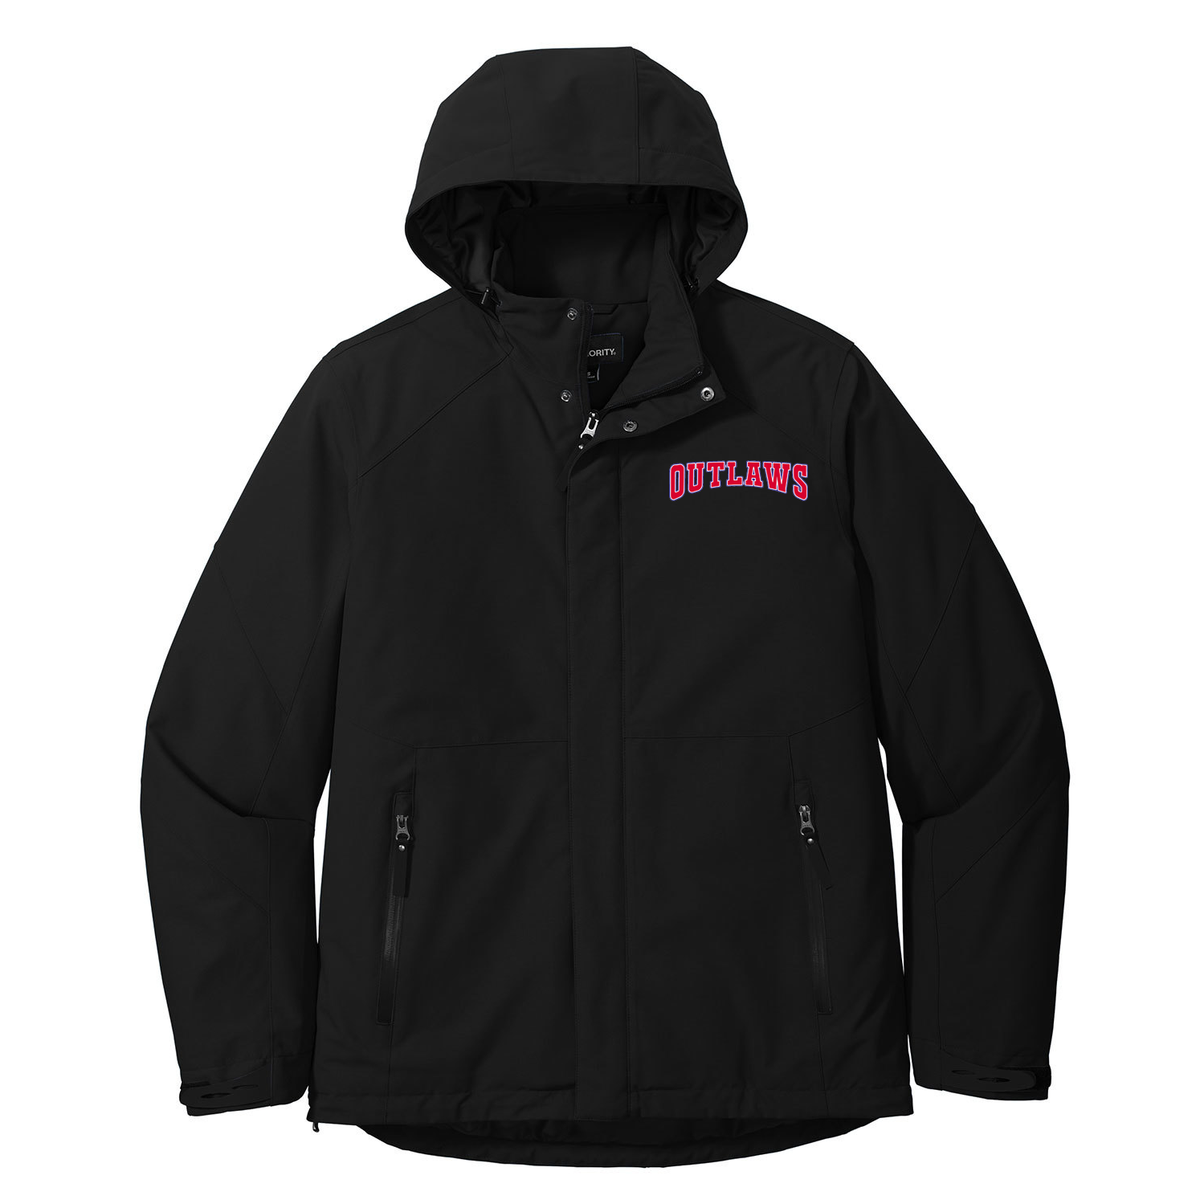 Southern Indiana Outlaws Baseball Insulated Tech Jacket